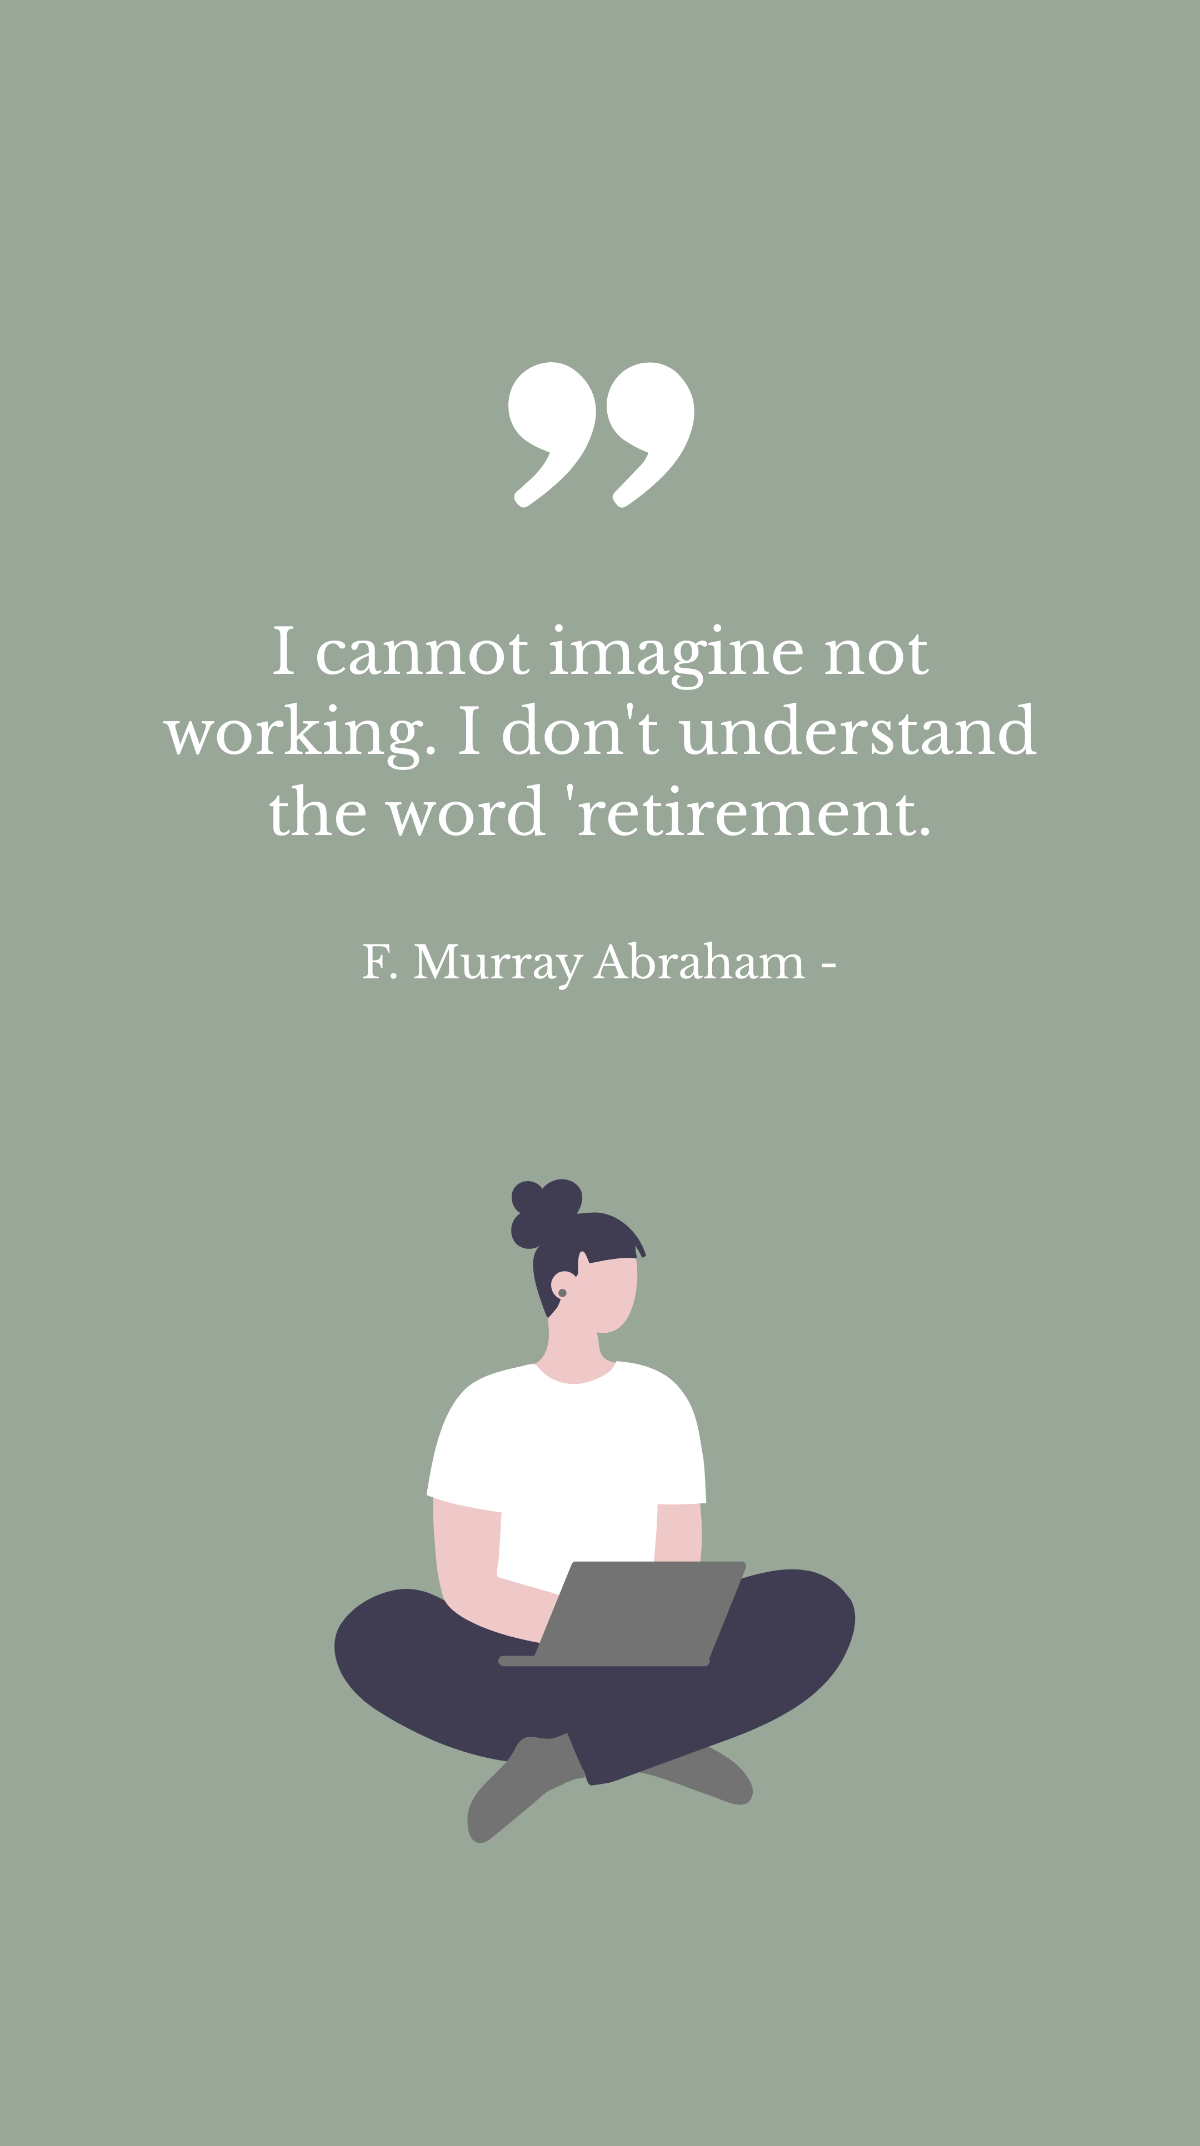 F. Murray Abraham - I cannot imagine not working. I don't understand the word 'retirement.